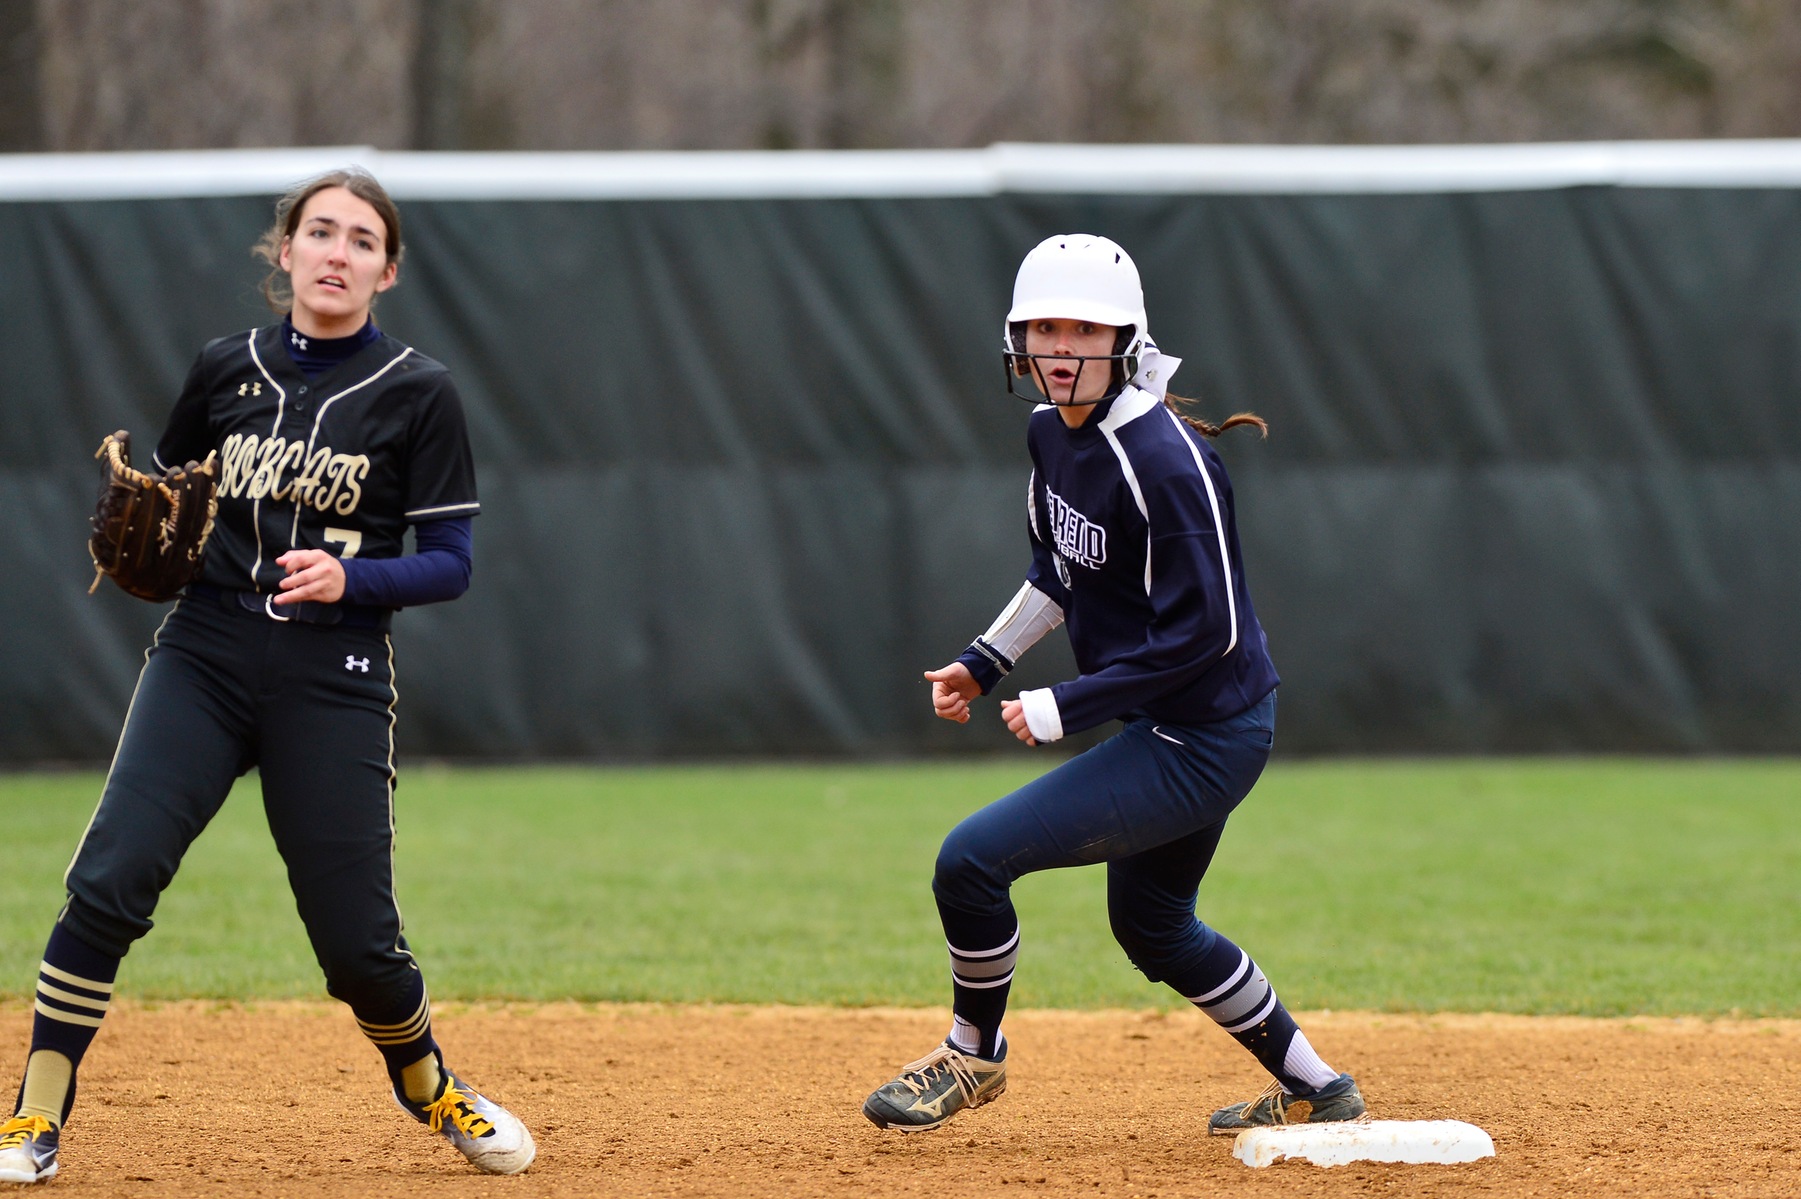 Softball Splits at D'Youville; Maintains AMCC Lead